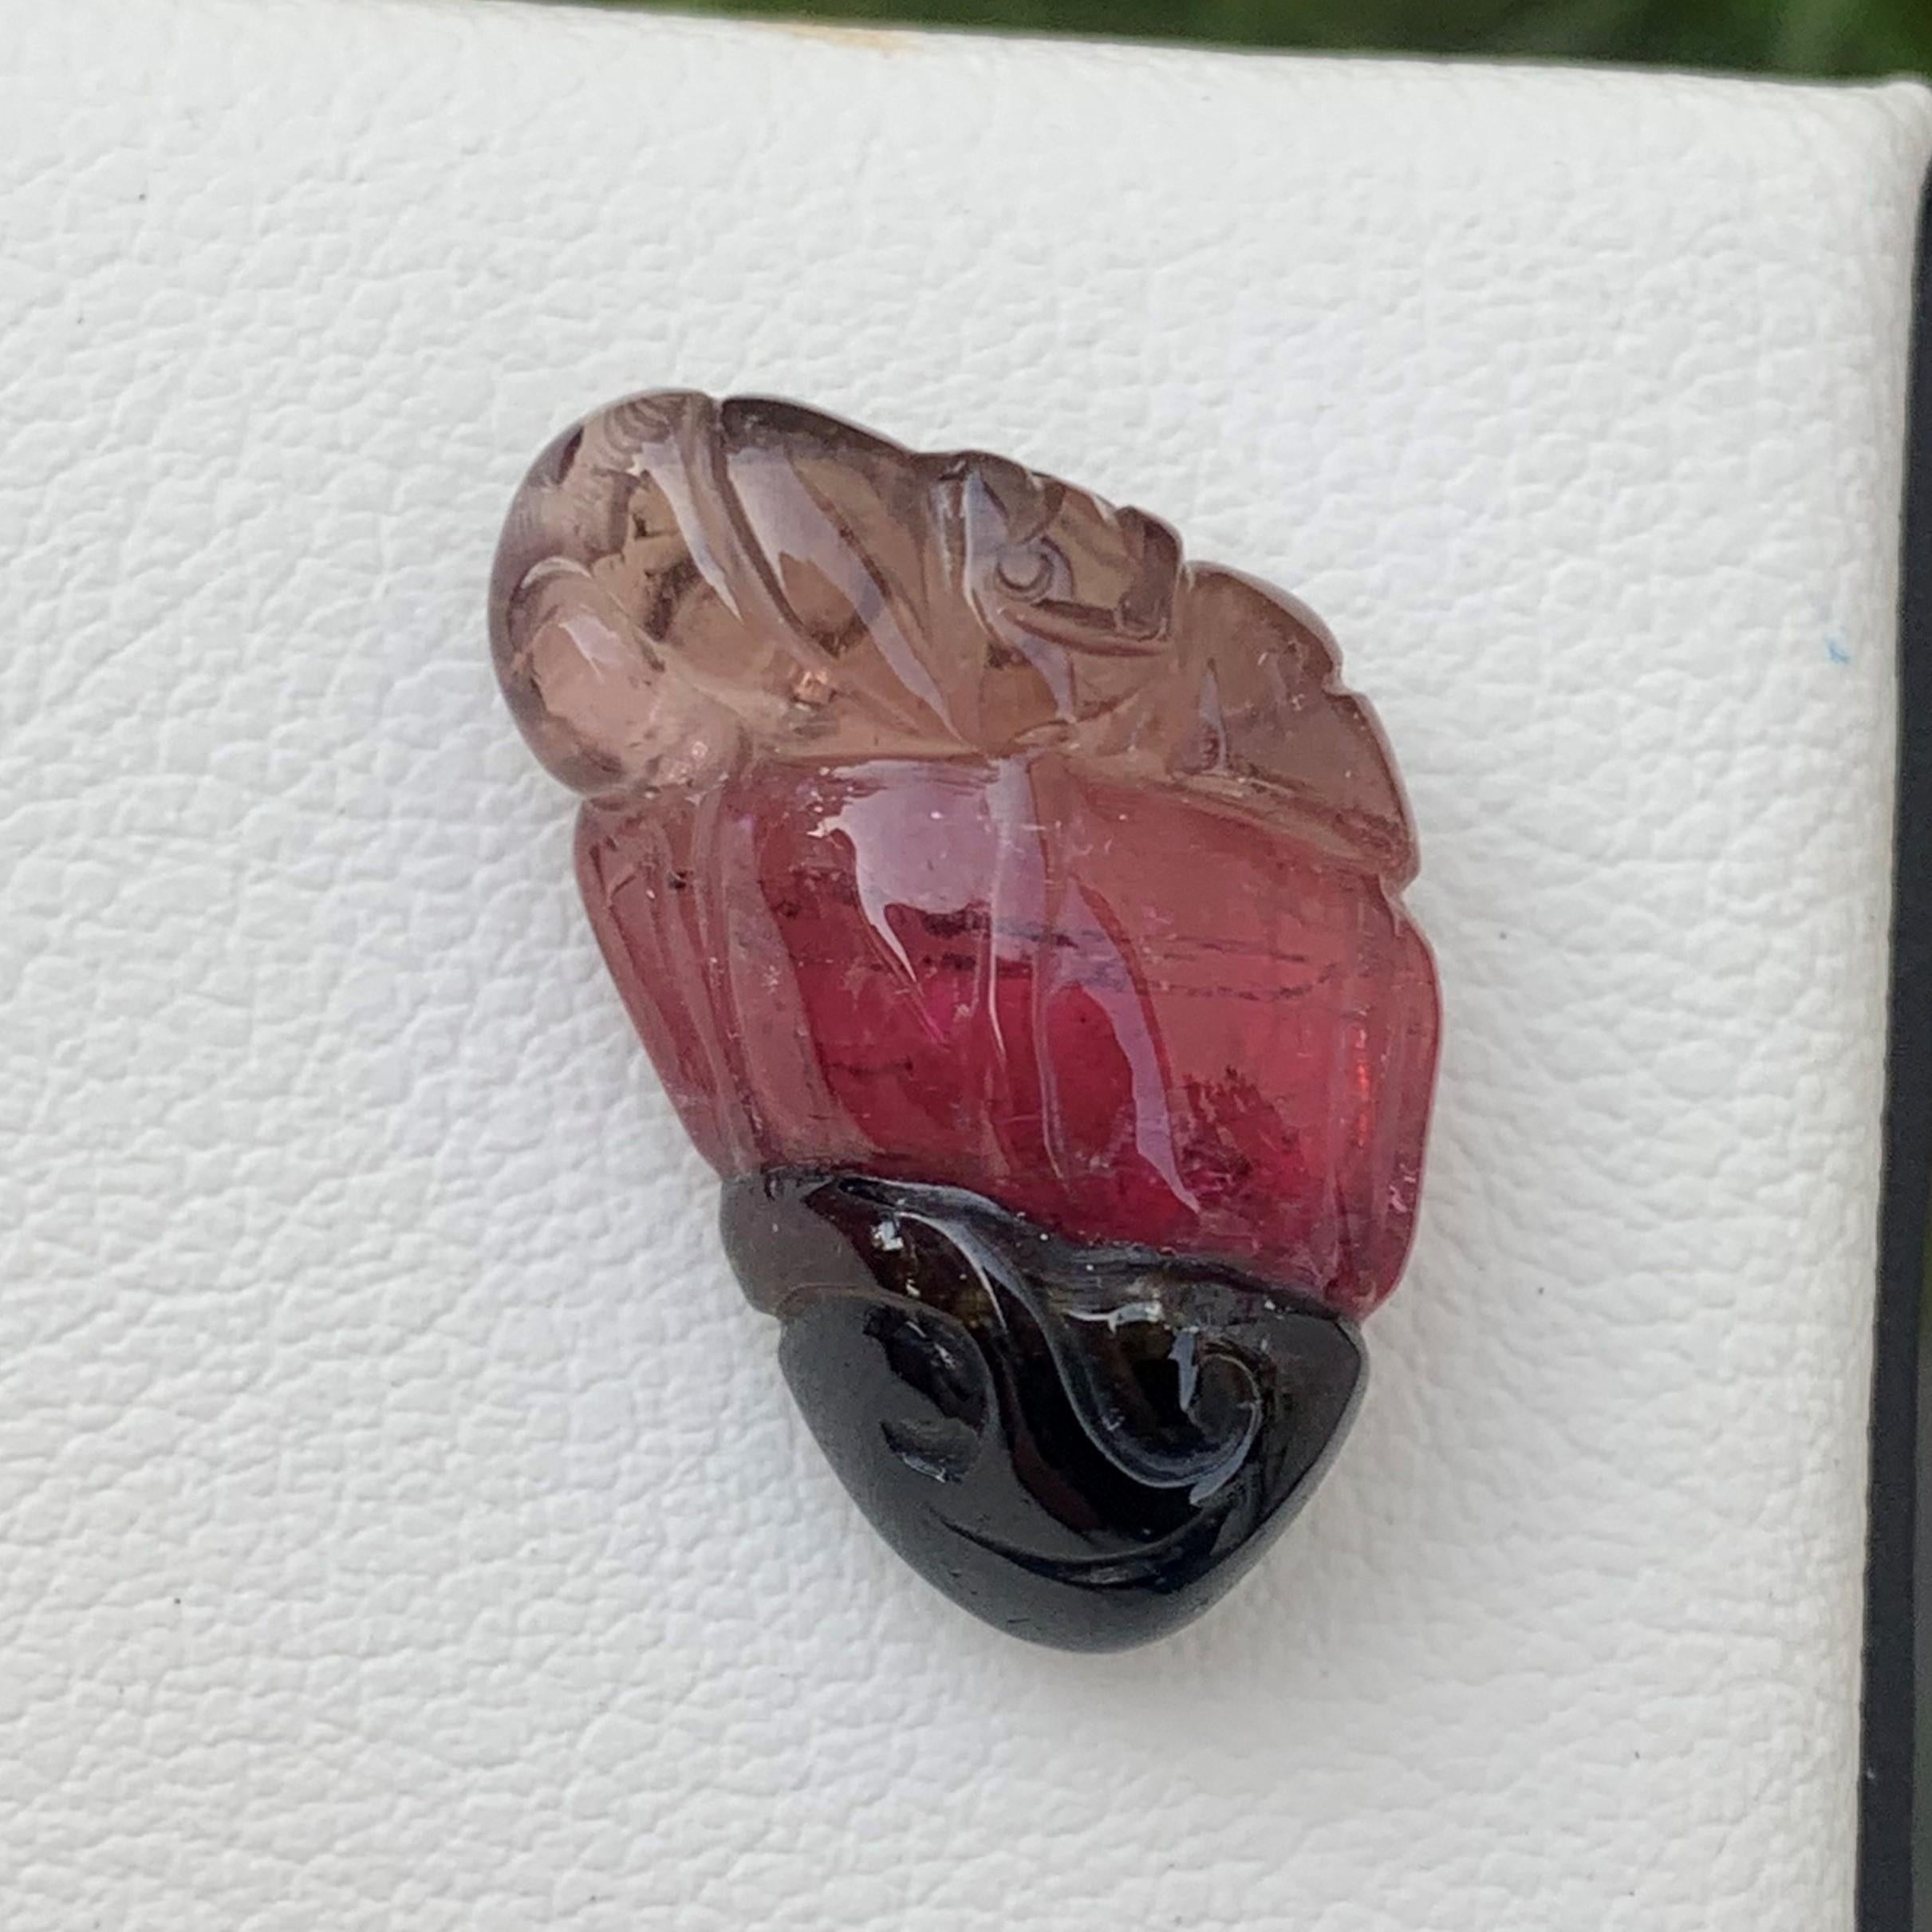 Tourmaline Carved
Weight: 22.25 Carats
Dimension: 24x15x8 Mm
Origin: Africa
Color: Tri ( Black,Red,Peach)
Shape: Carving
Quality: Top
.
Bicolor tourmaline is connected to the heart chakra, which makes it good for cleansing and removing any